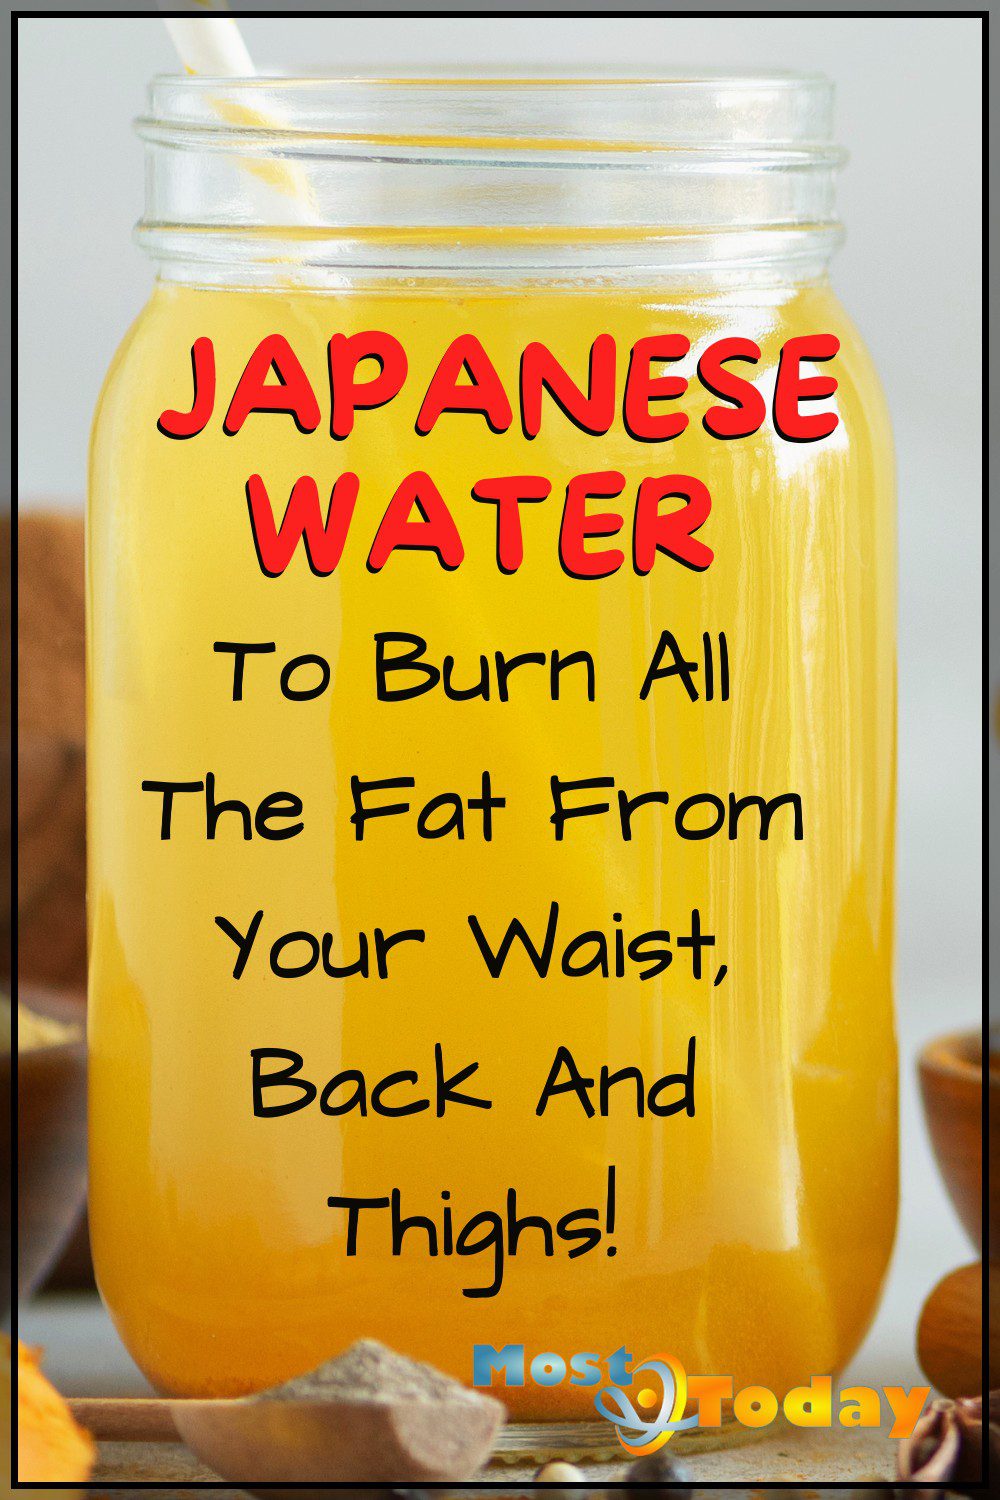 Fact About How To Burn All The Fat From Your Waist, Back And Thighs!